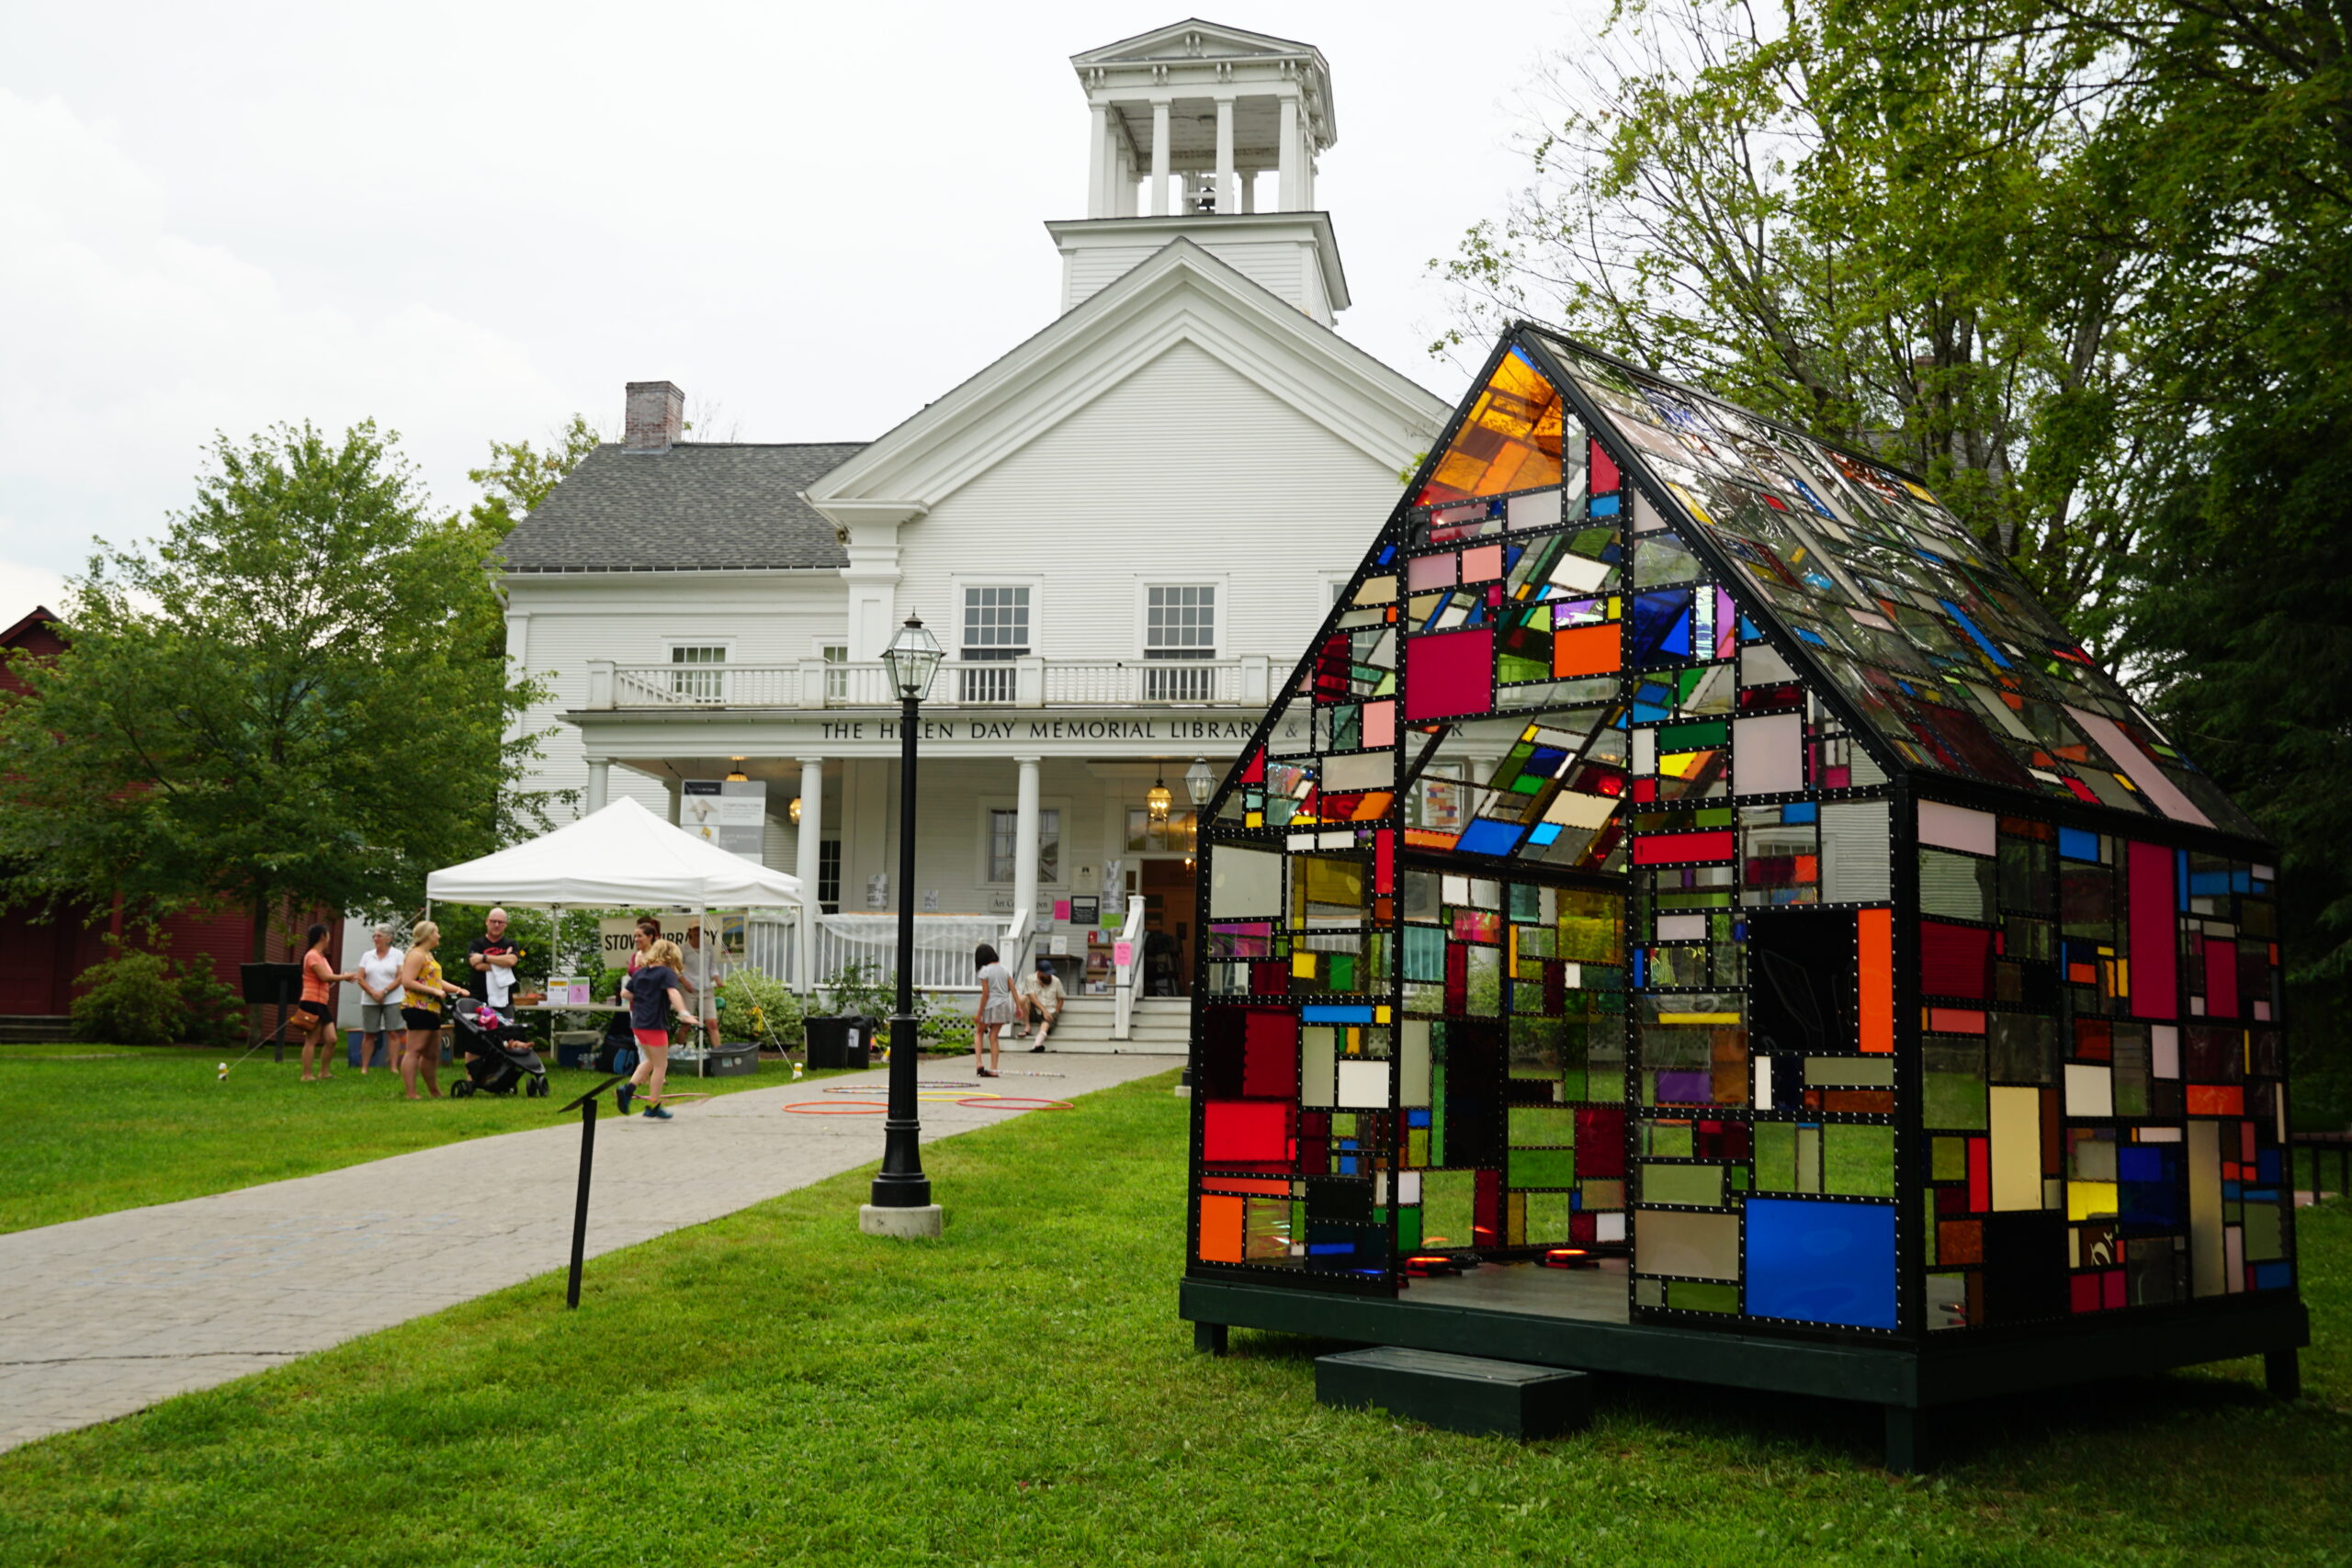 A small house made of stained glass stanks before a white library building in summer.